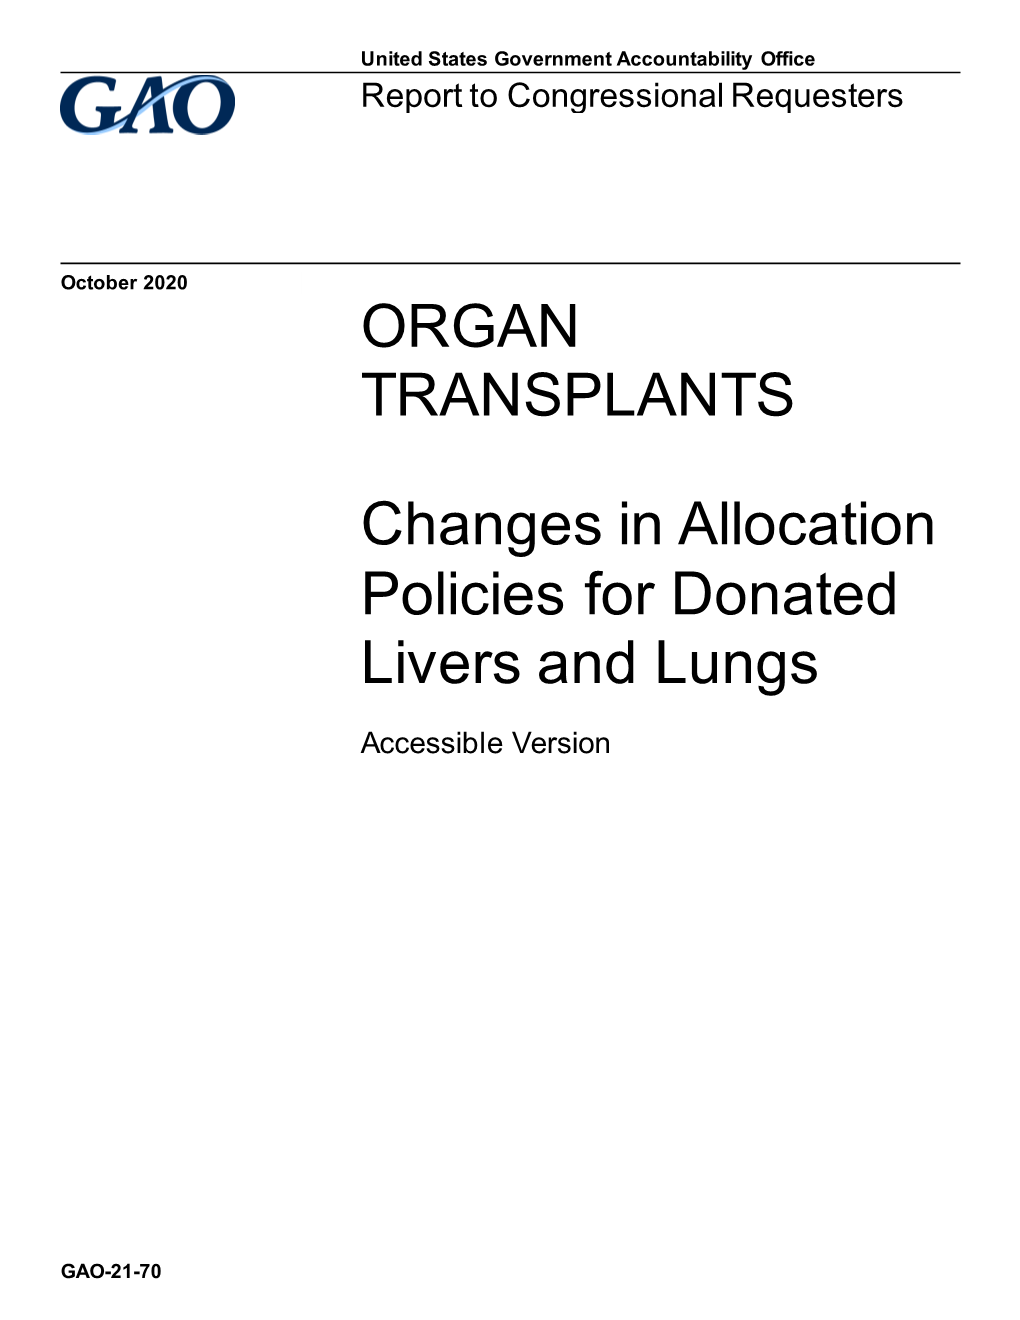 GAO-21-70, Accessible Version, ORGAN TRANSPLANTS: Changes